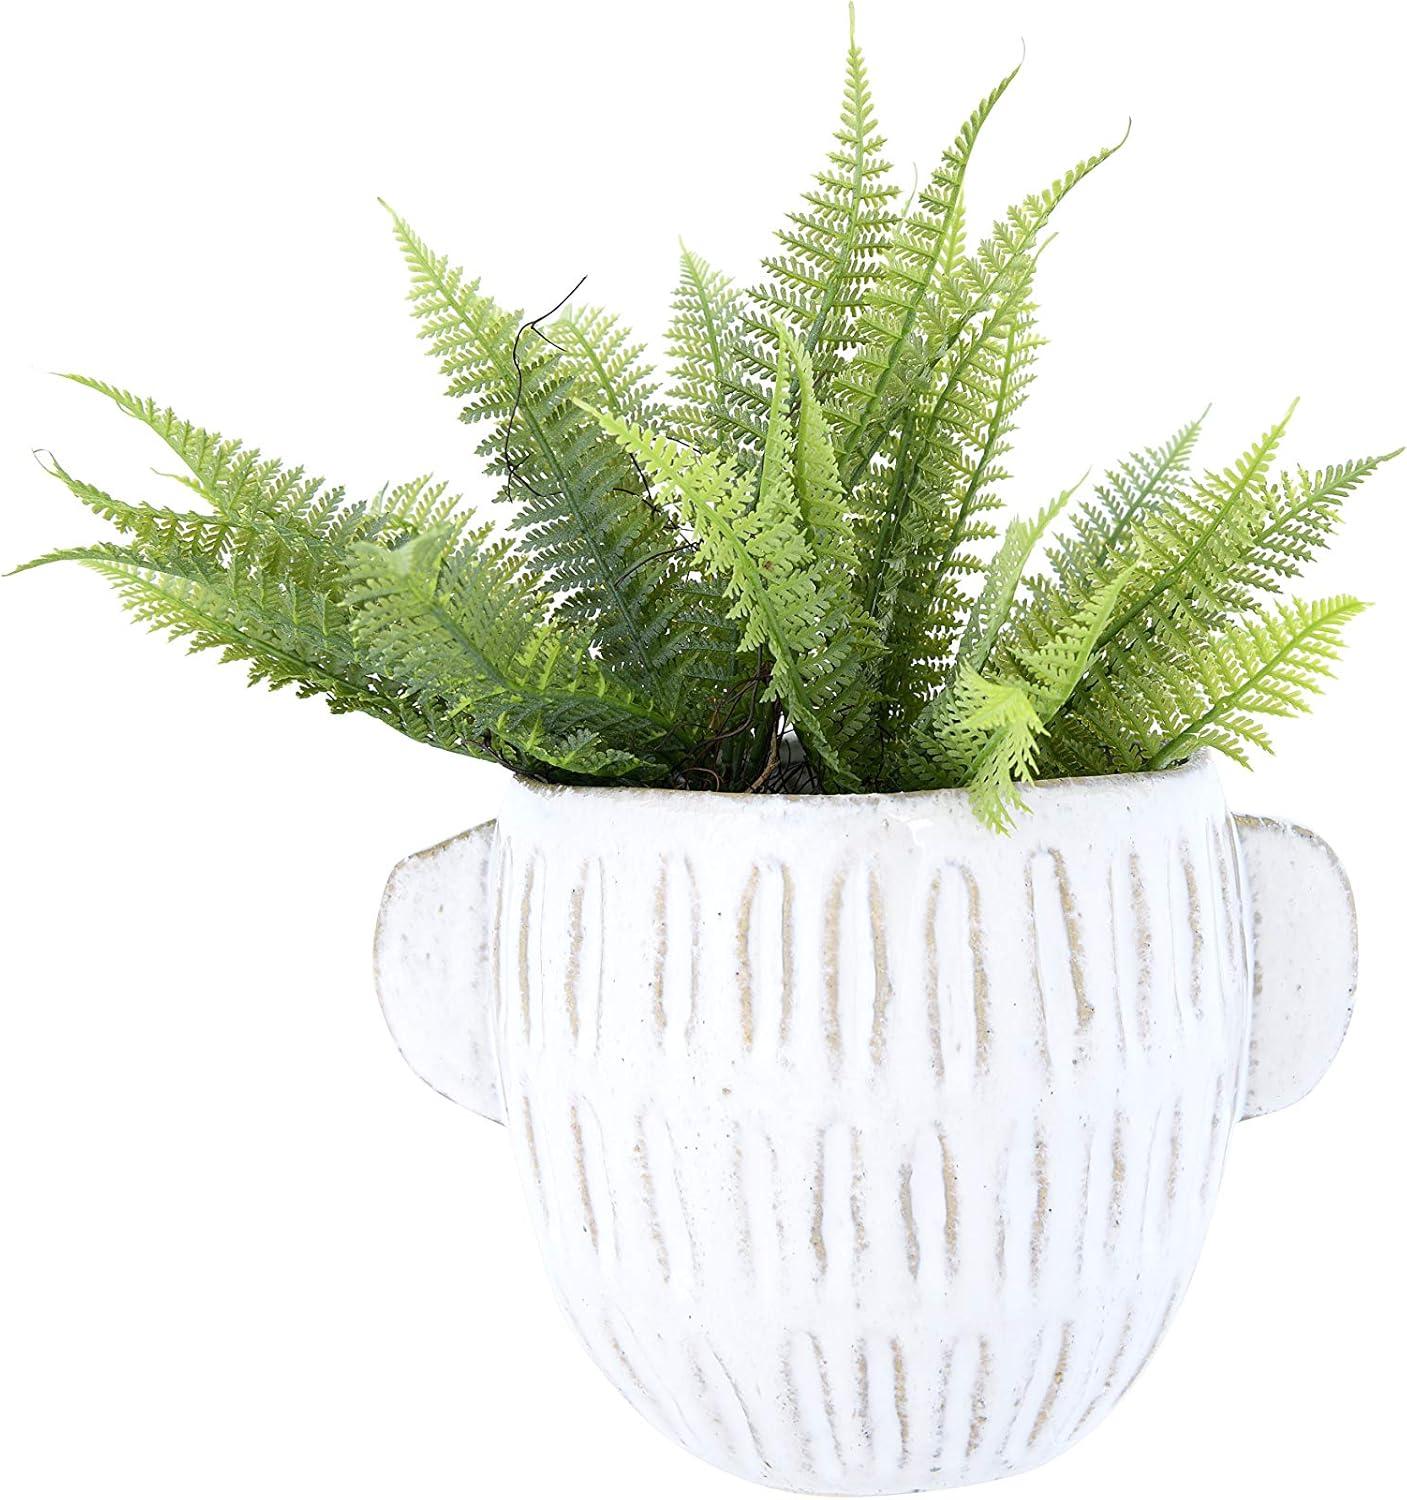 Ear-Handled Off-White Stoneware Planter with Reactive Glaze, 9.45"